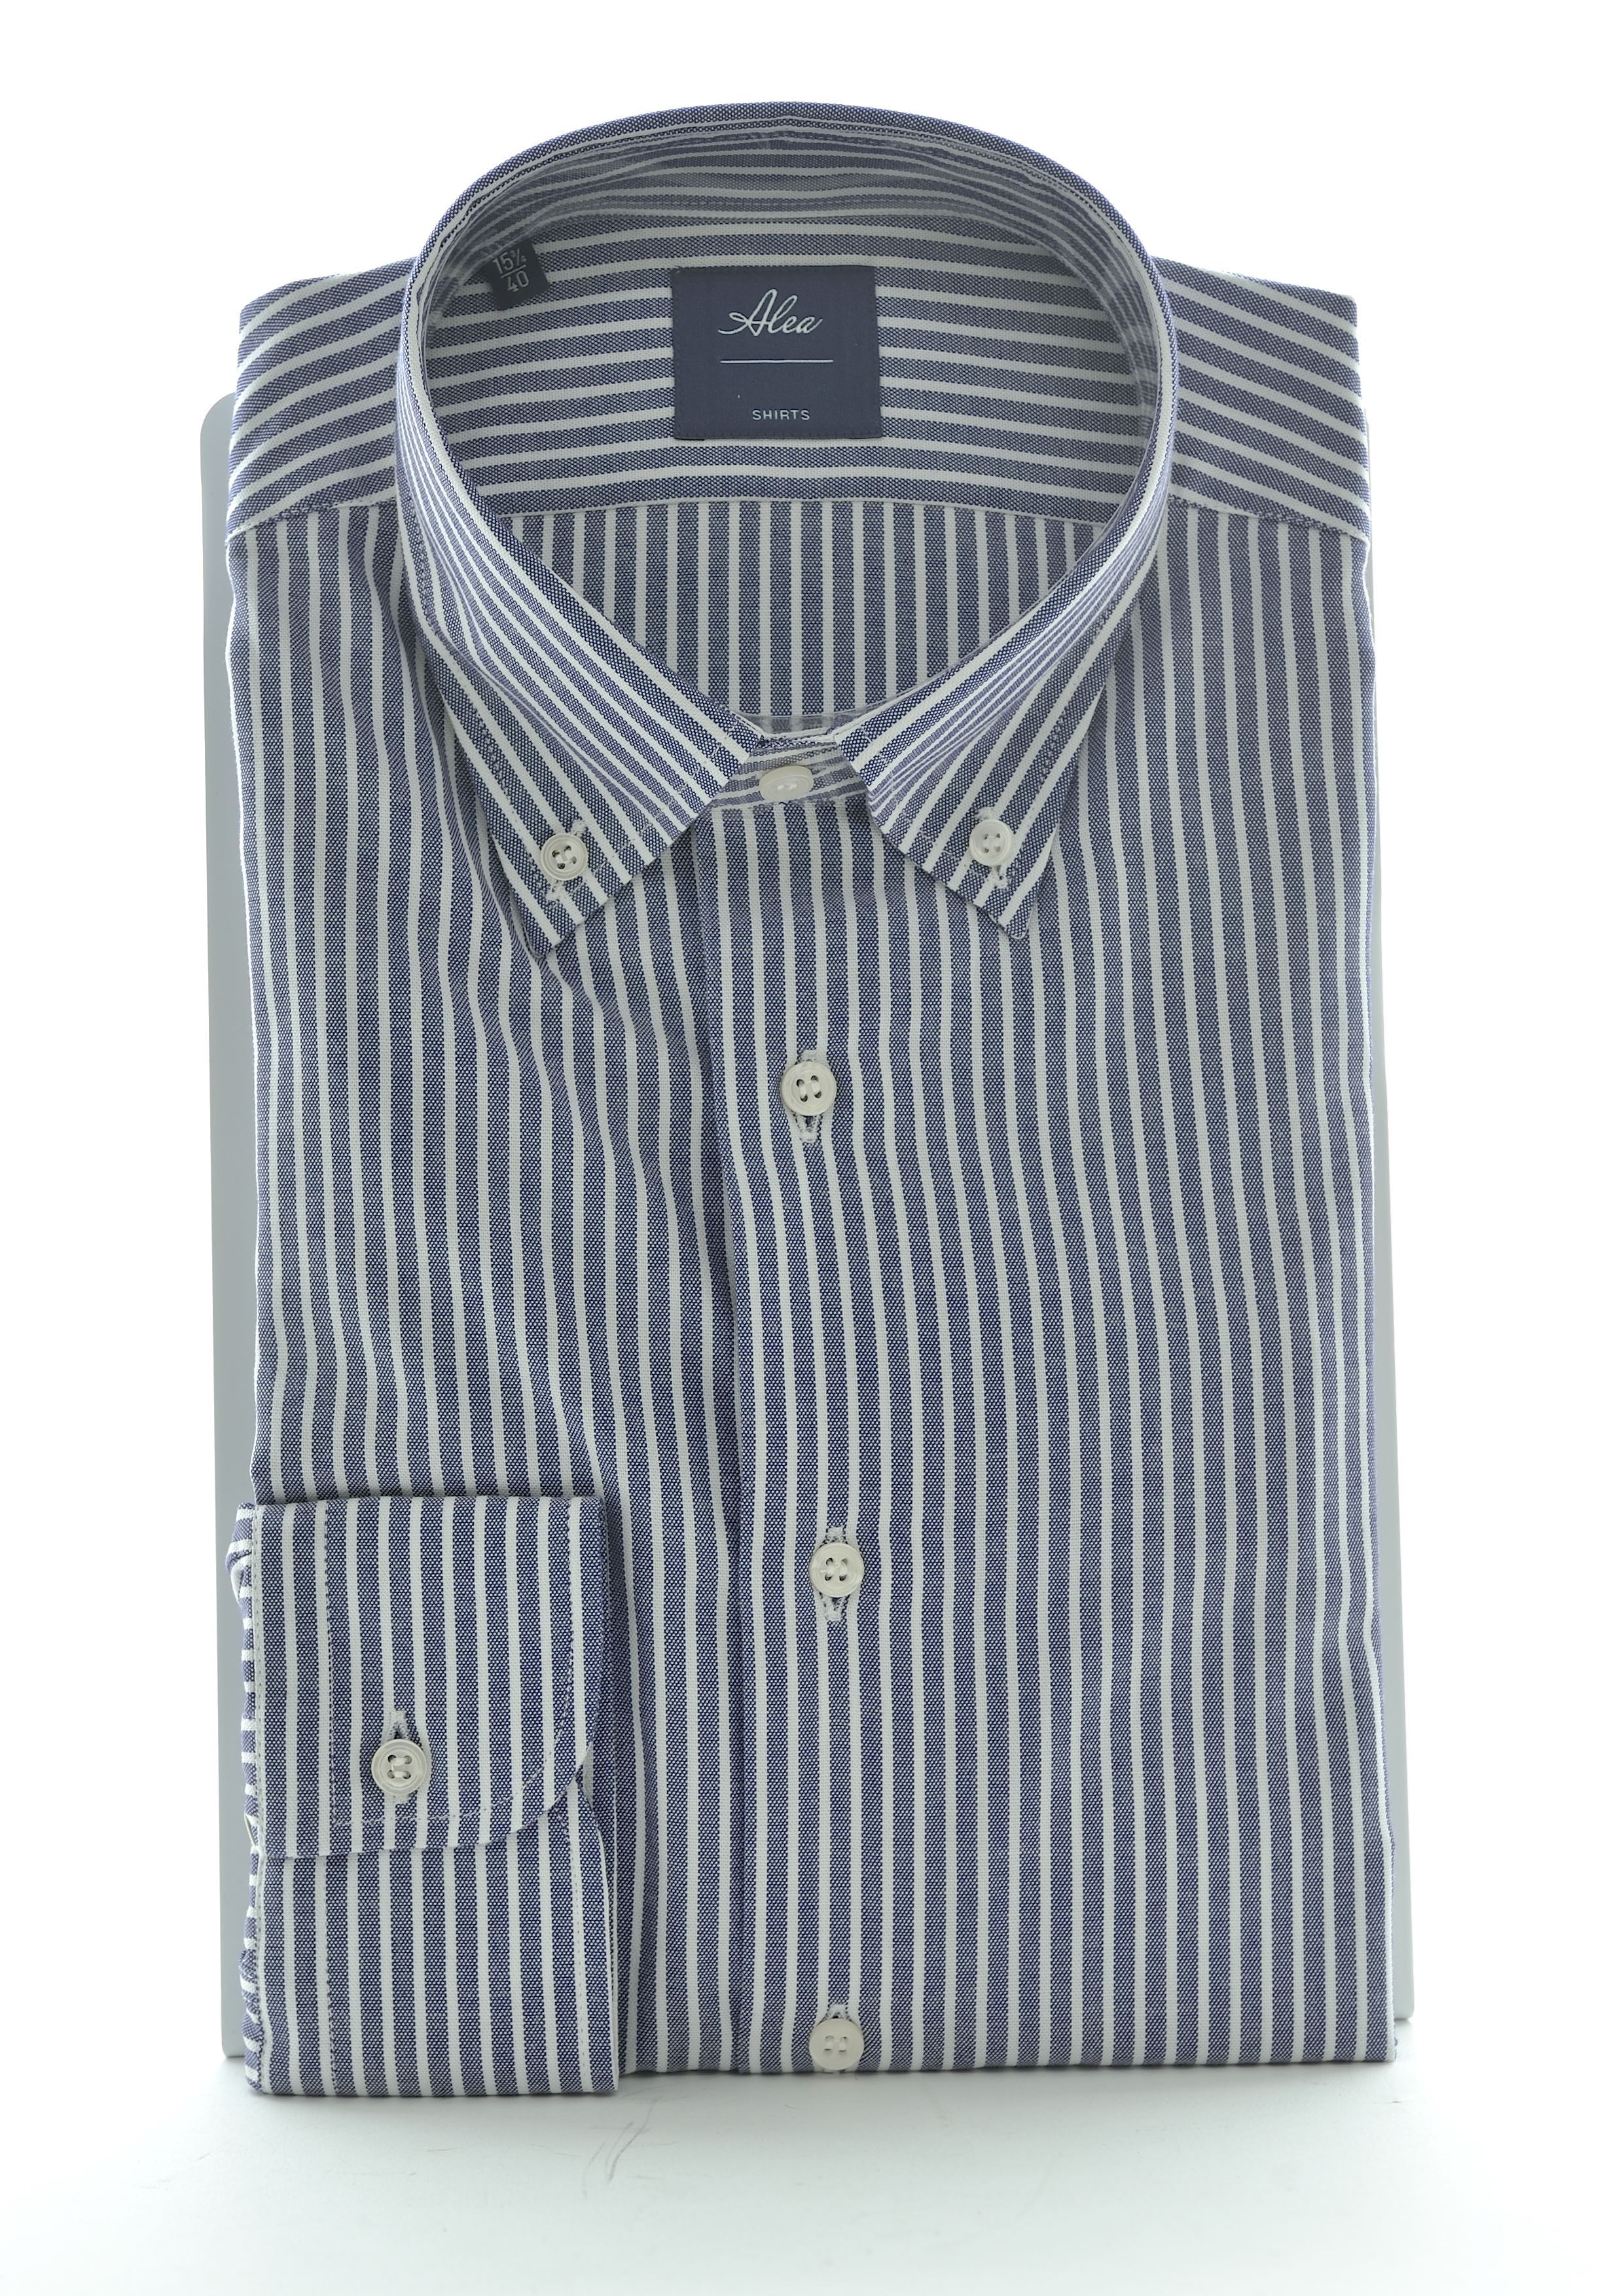 Picture of Striped shirt blue background